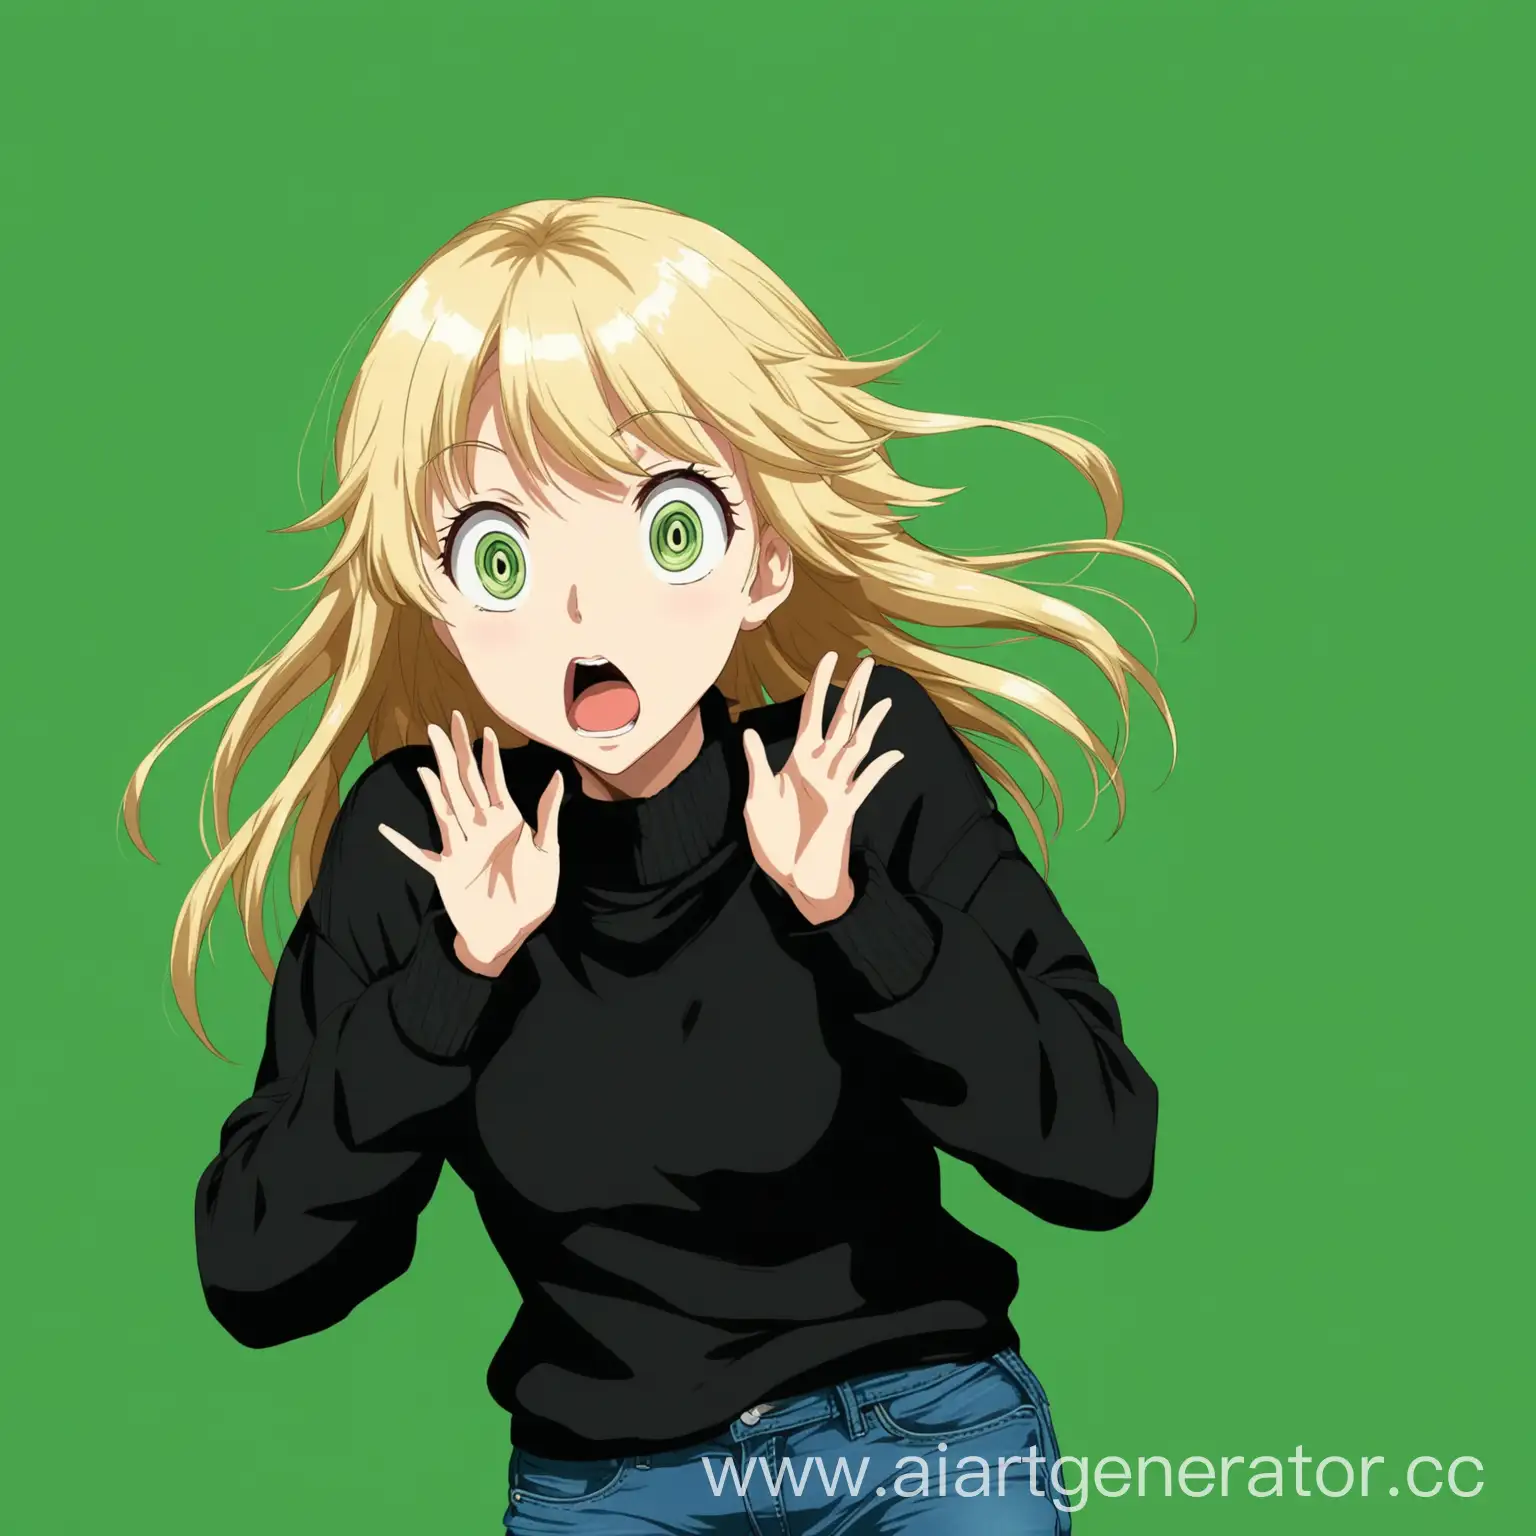 Surprised-Anime-Blonde-Girl-in-Black-Sweater-and-Jeans-on-Green-Background